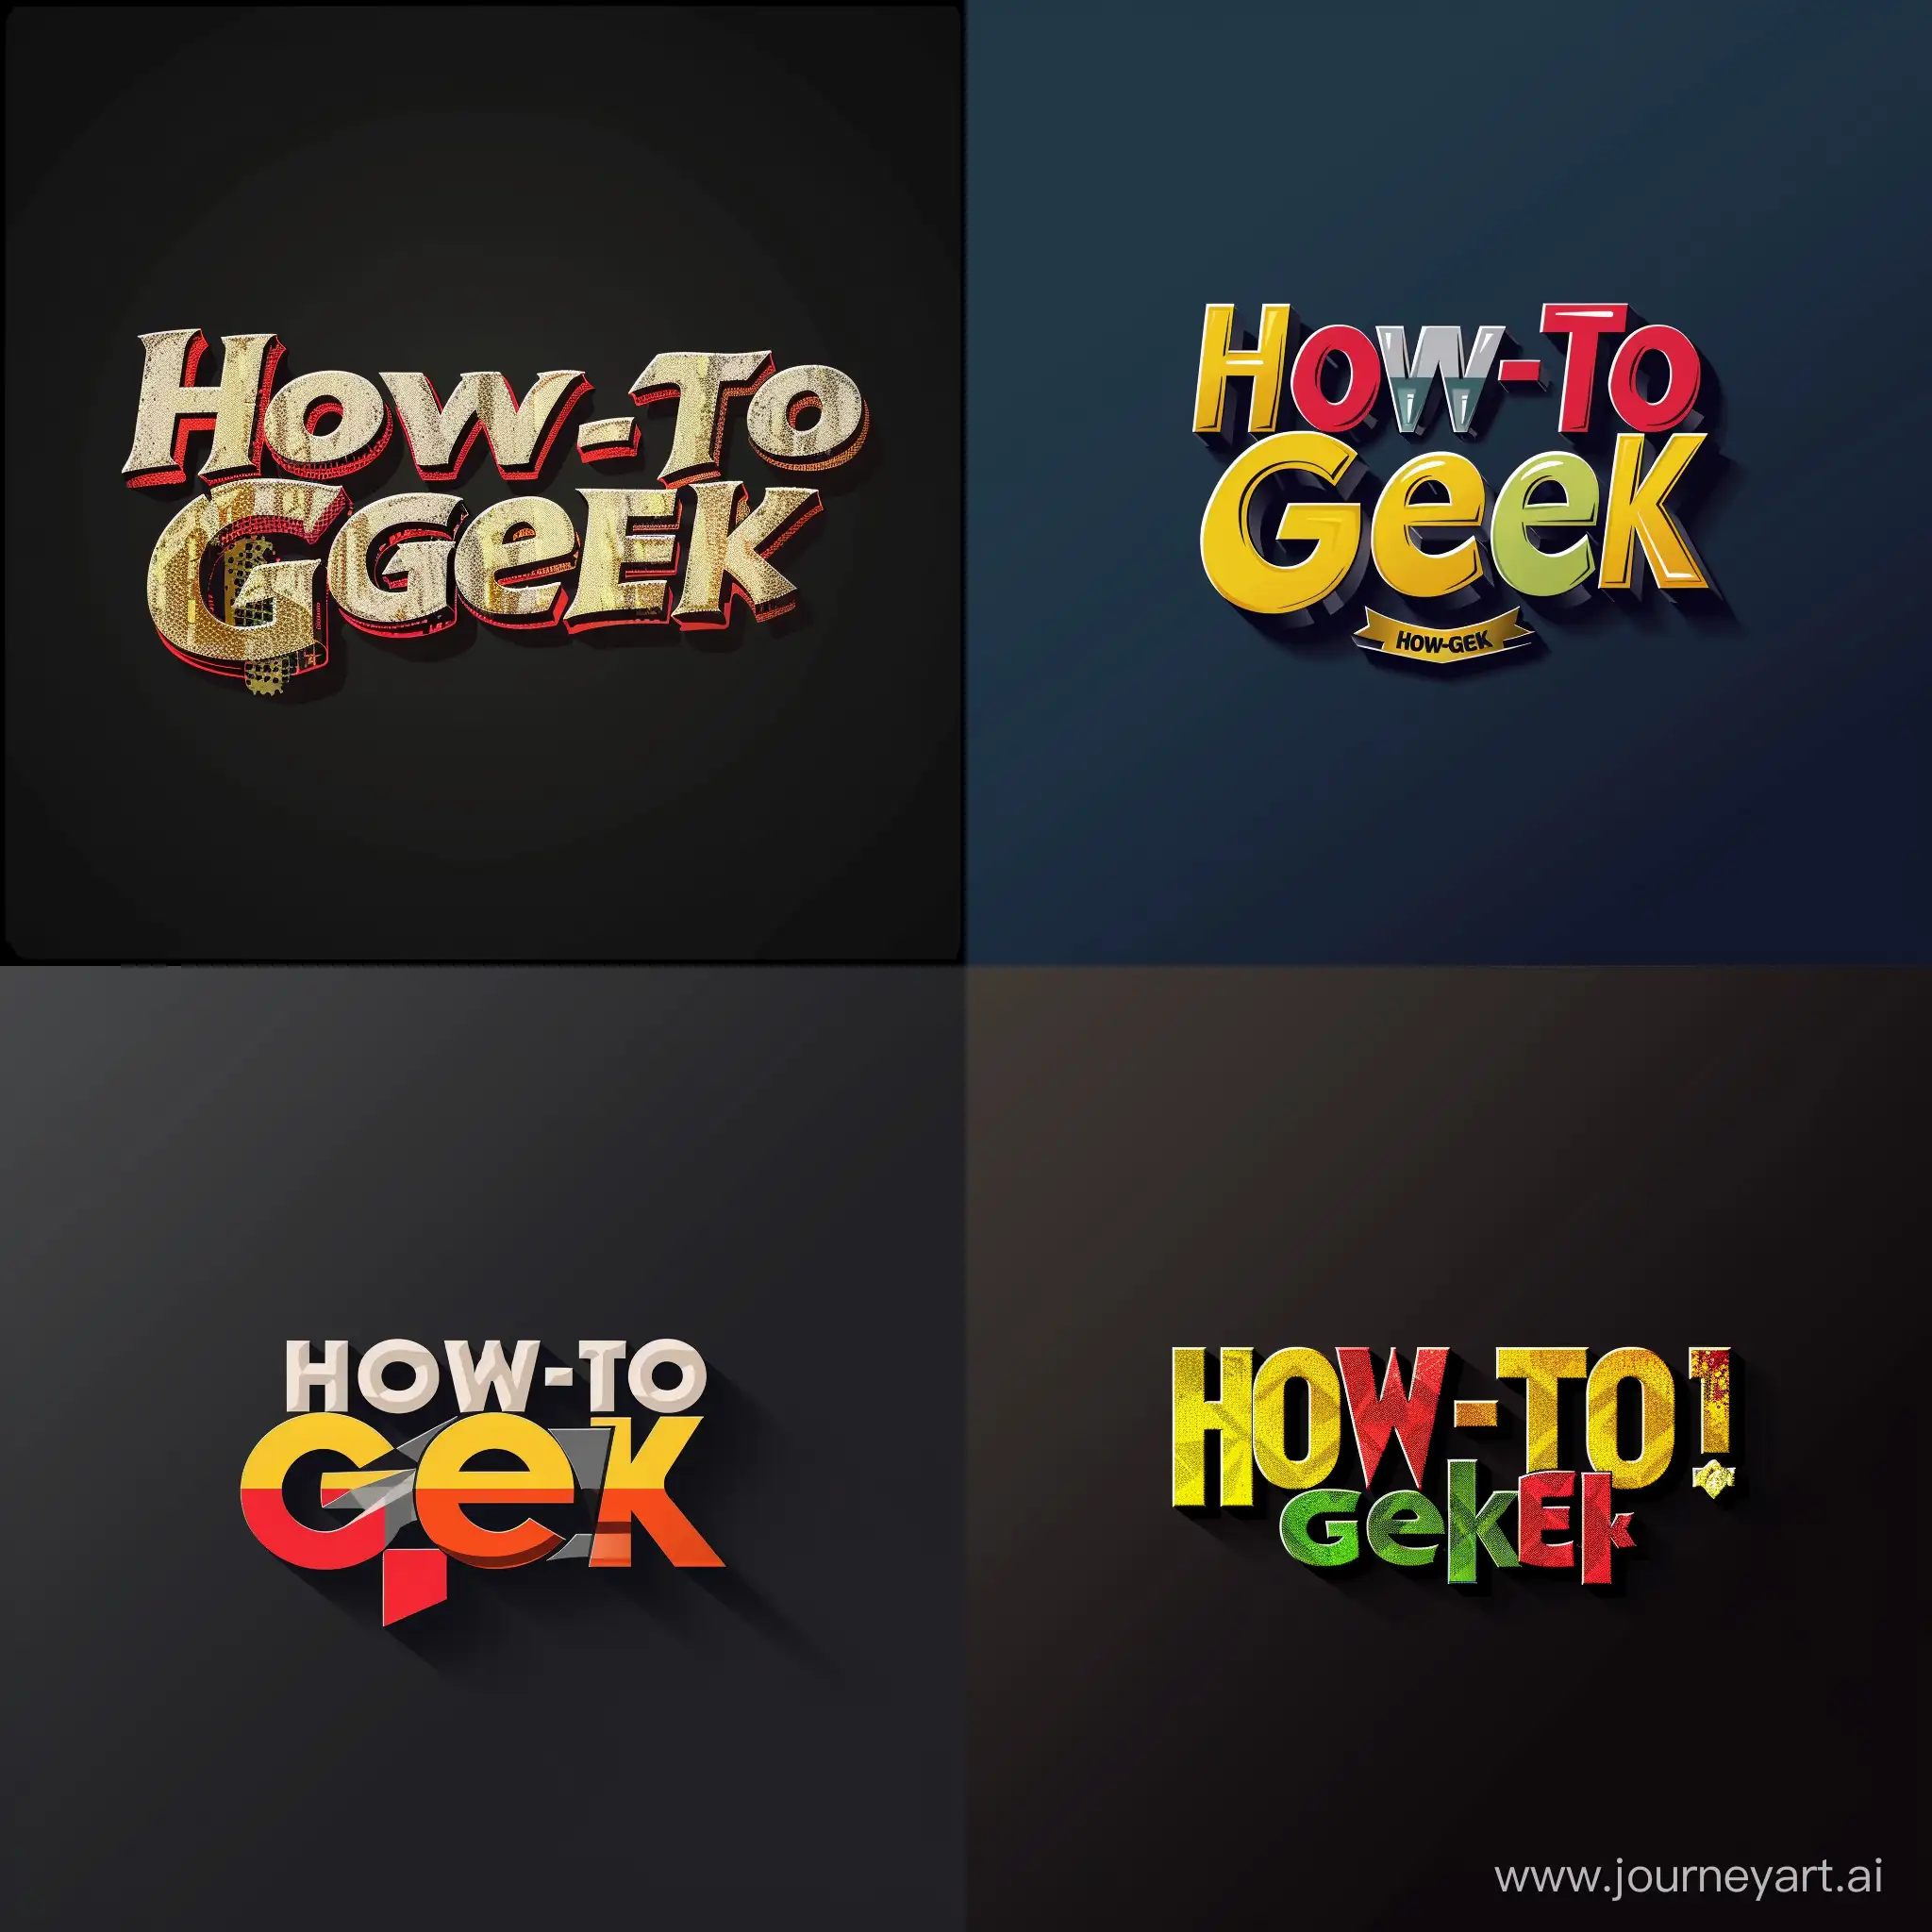 A logo made of a text '' How-To Geek''